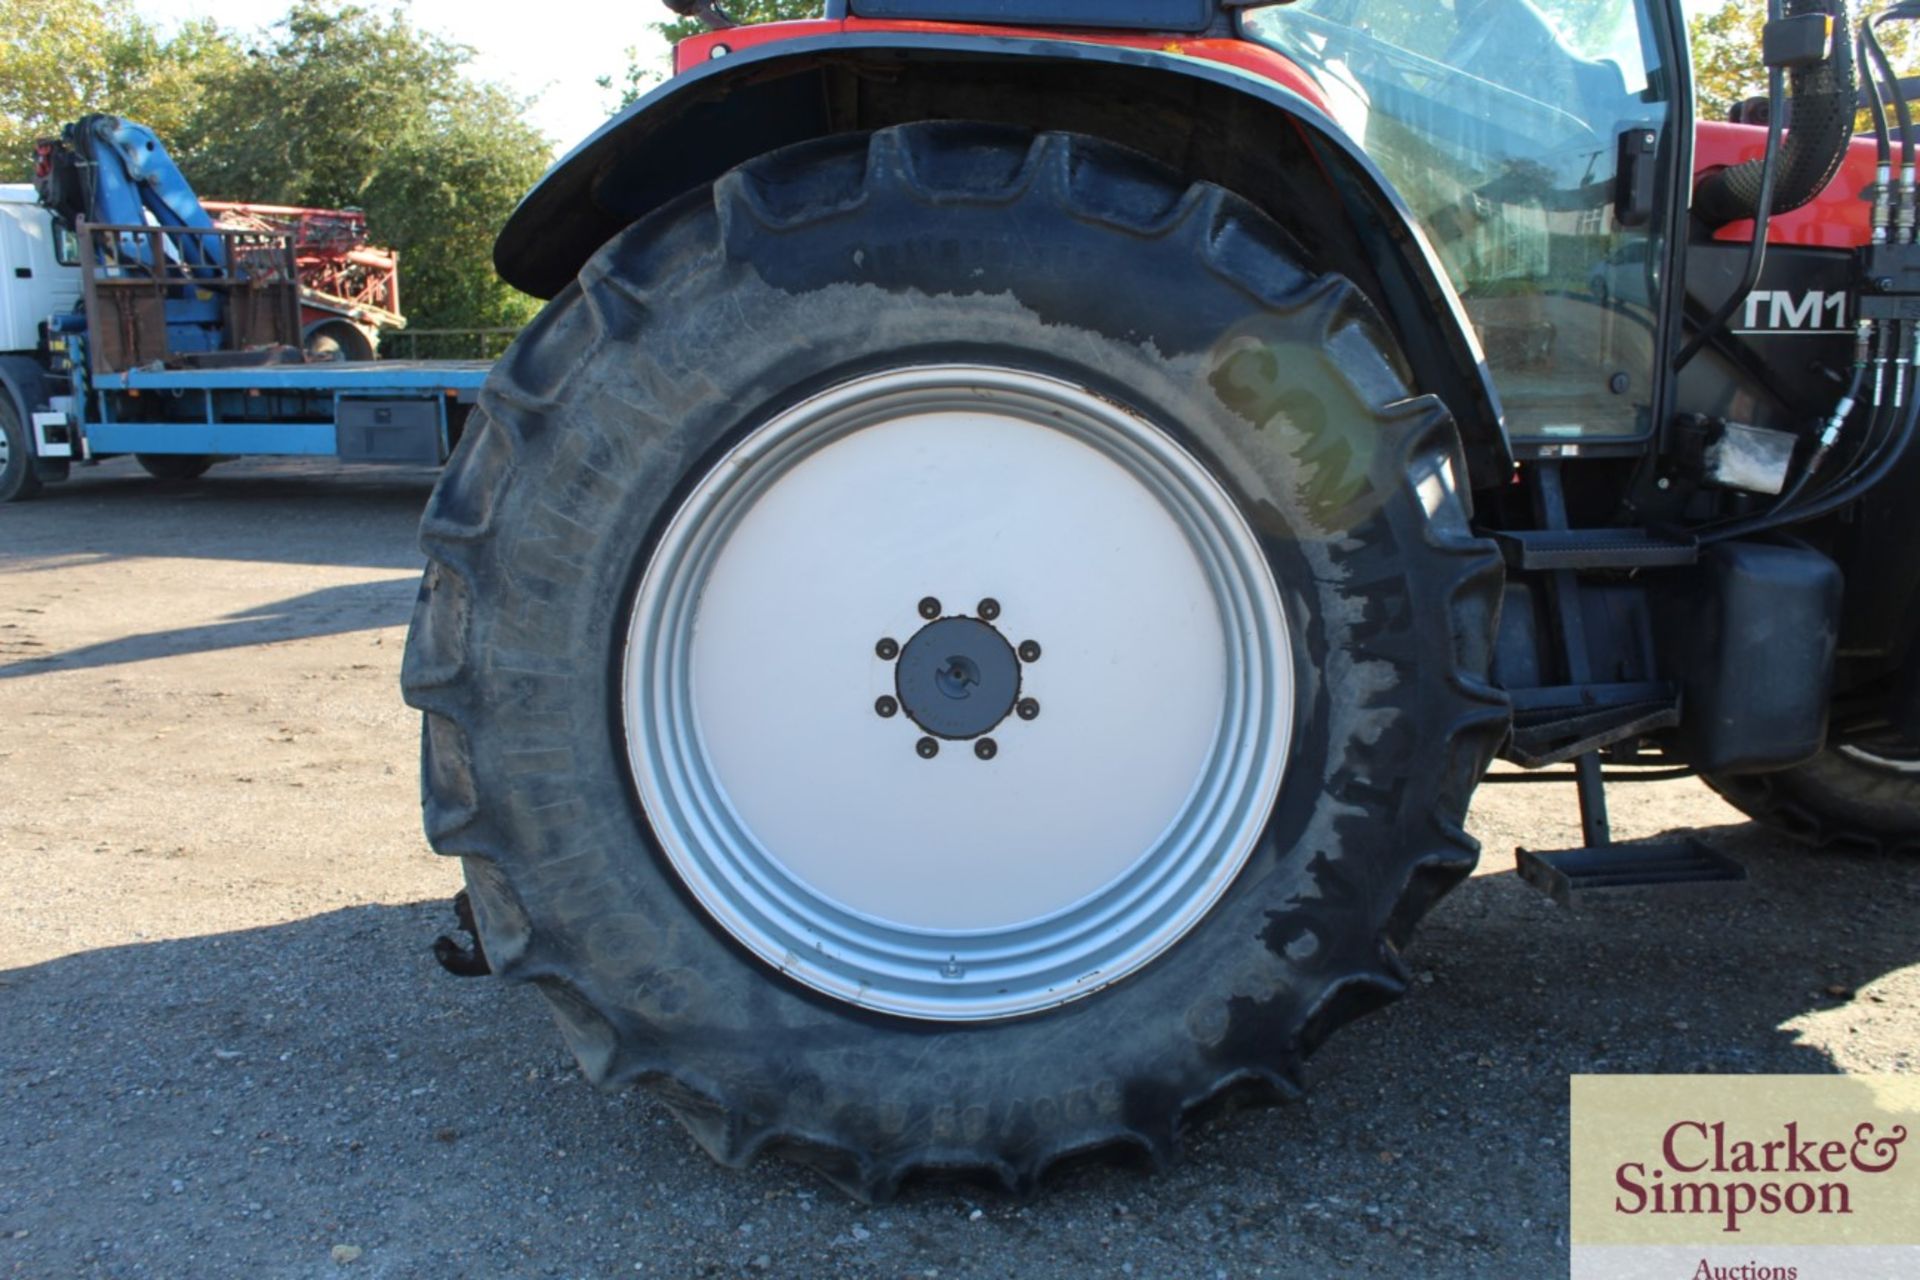 New Holland TM150 4WD tractor. 28/10/2000. 11,839 hours. 520/85R42 rear wheels and tyres @ 60%. - Image 32 of 58